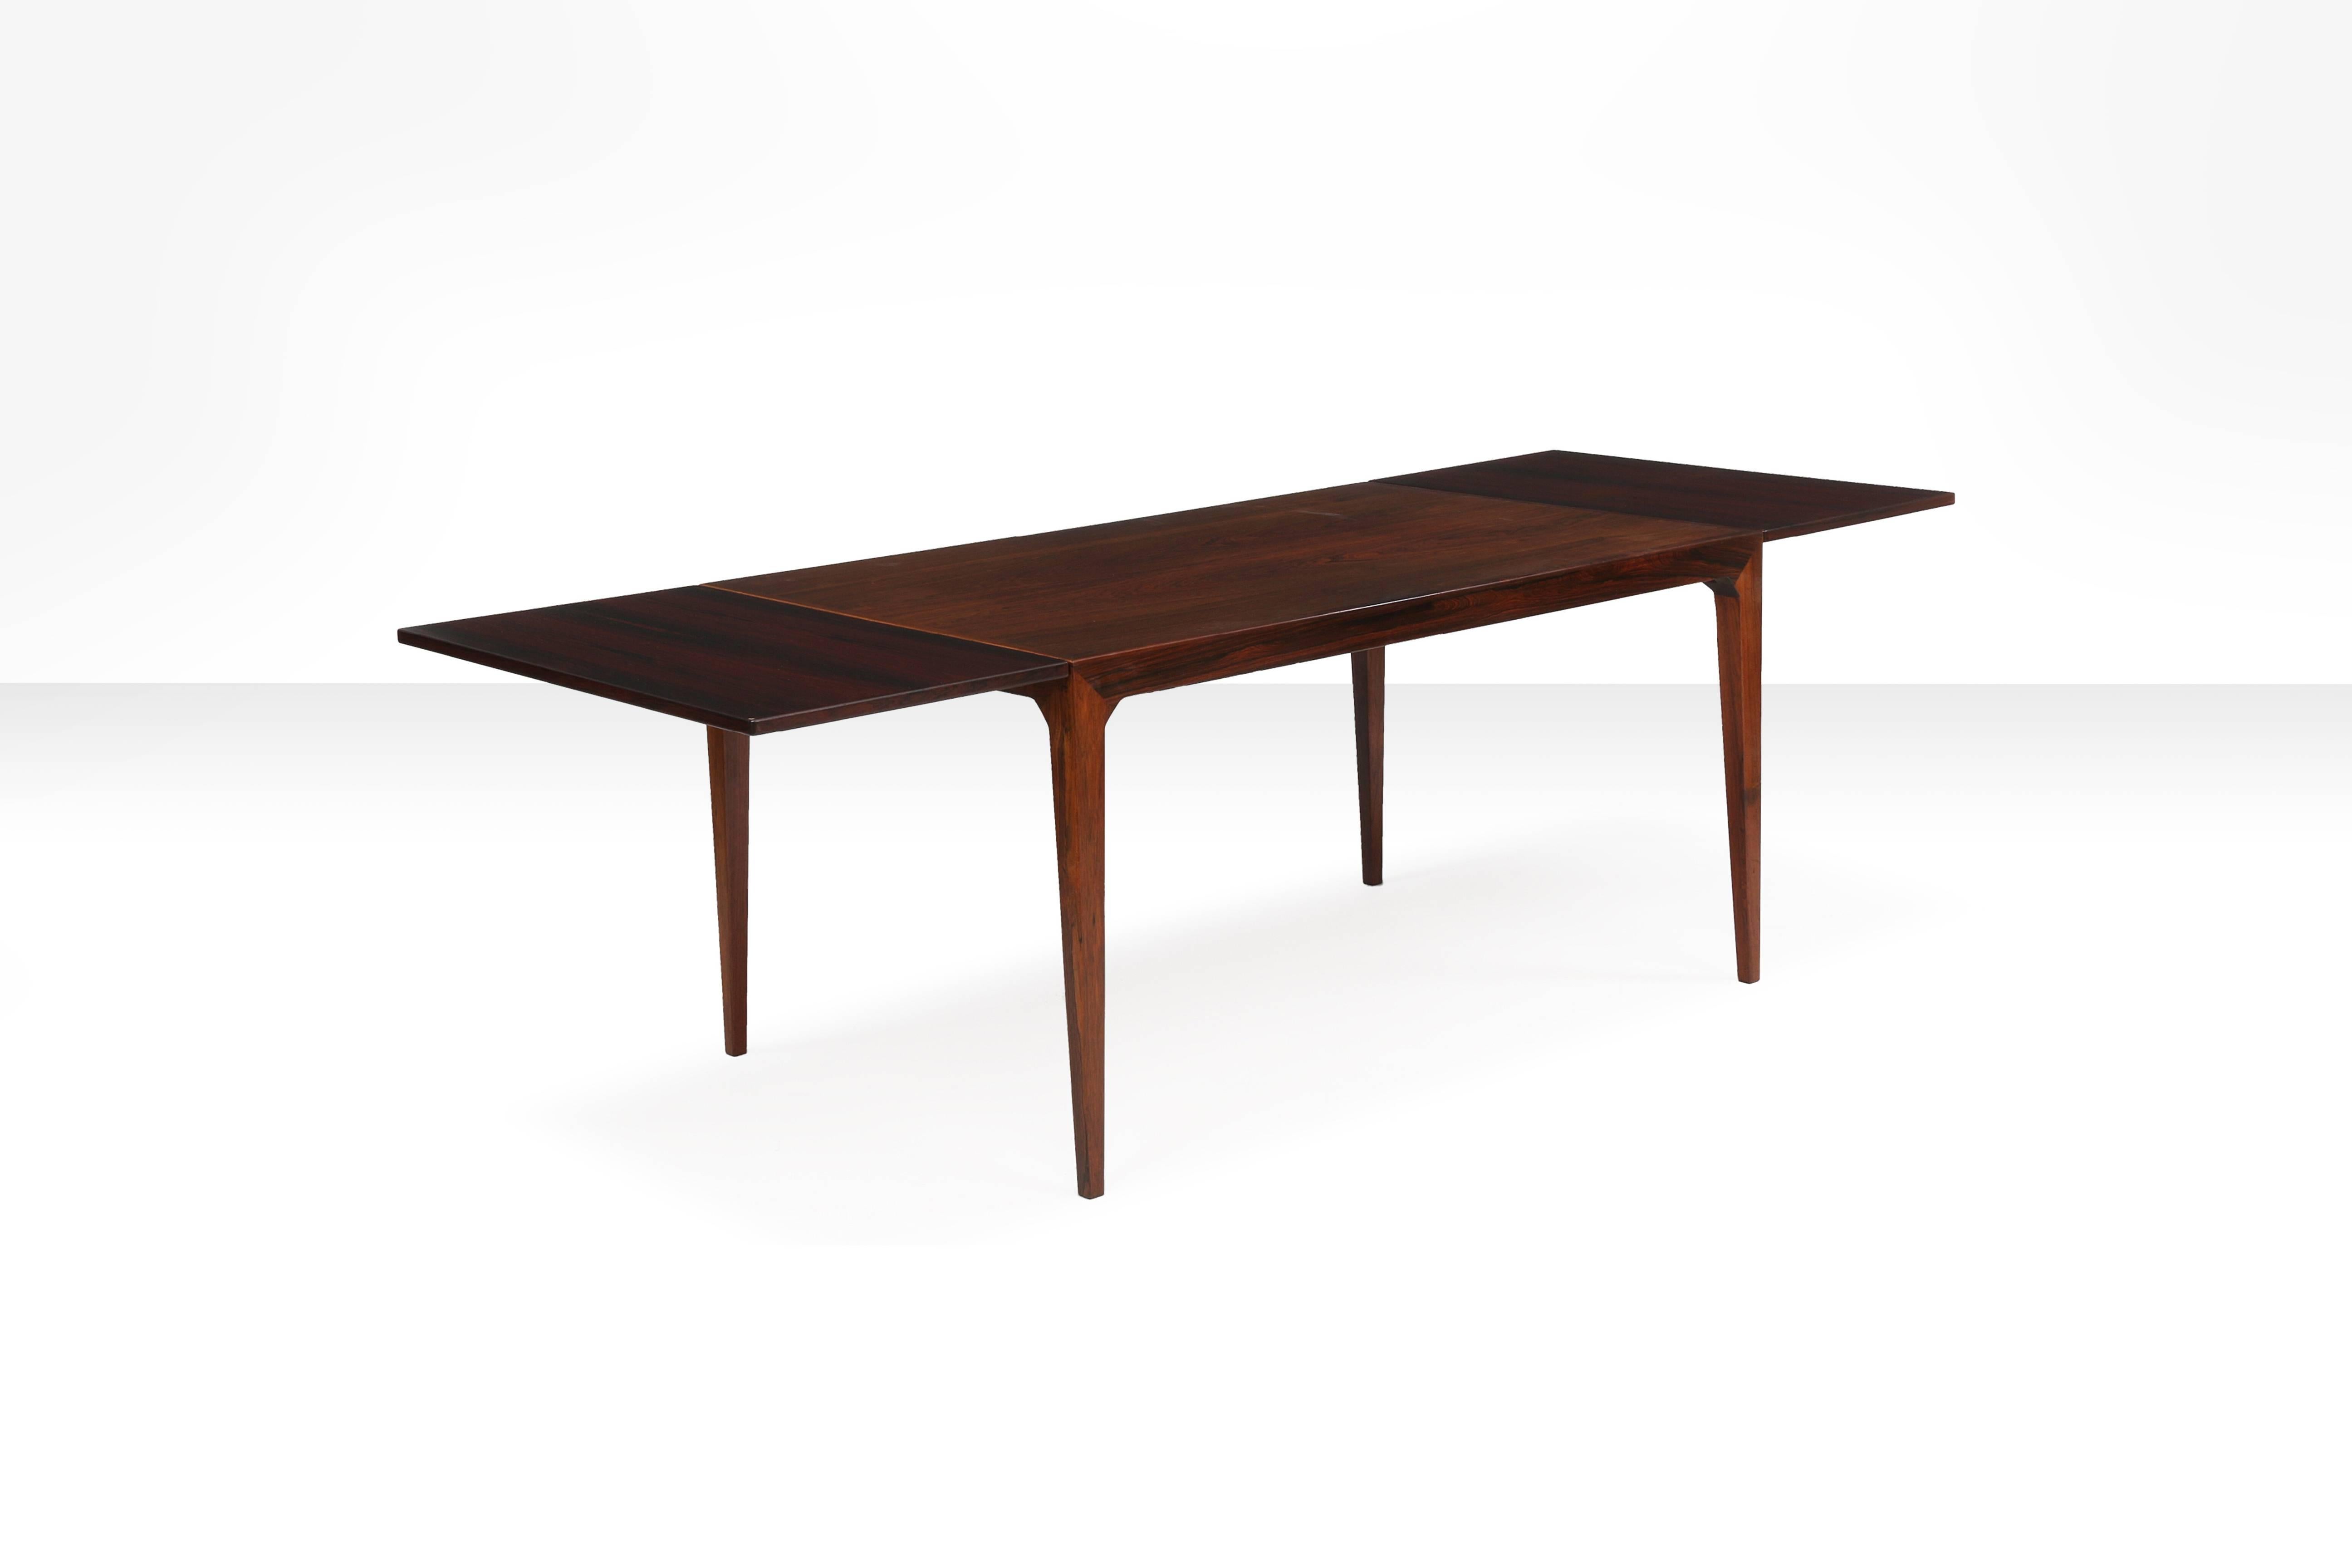 Rectangular rosewood dining table with two extra leaves, rail with carved handles for pulling out support beams for extra leaves. Mounted on tapering legs. 

Measurements:
140 (/189 cm with extra leaves) L x 90 cm W x 74 cm H.

This dining